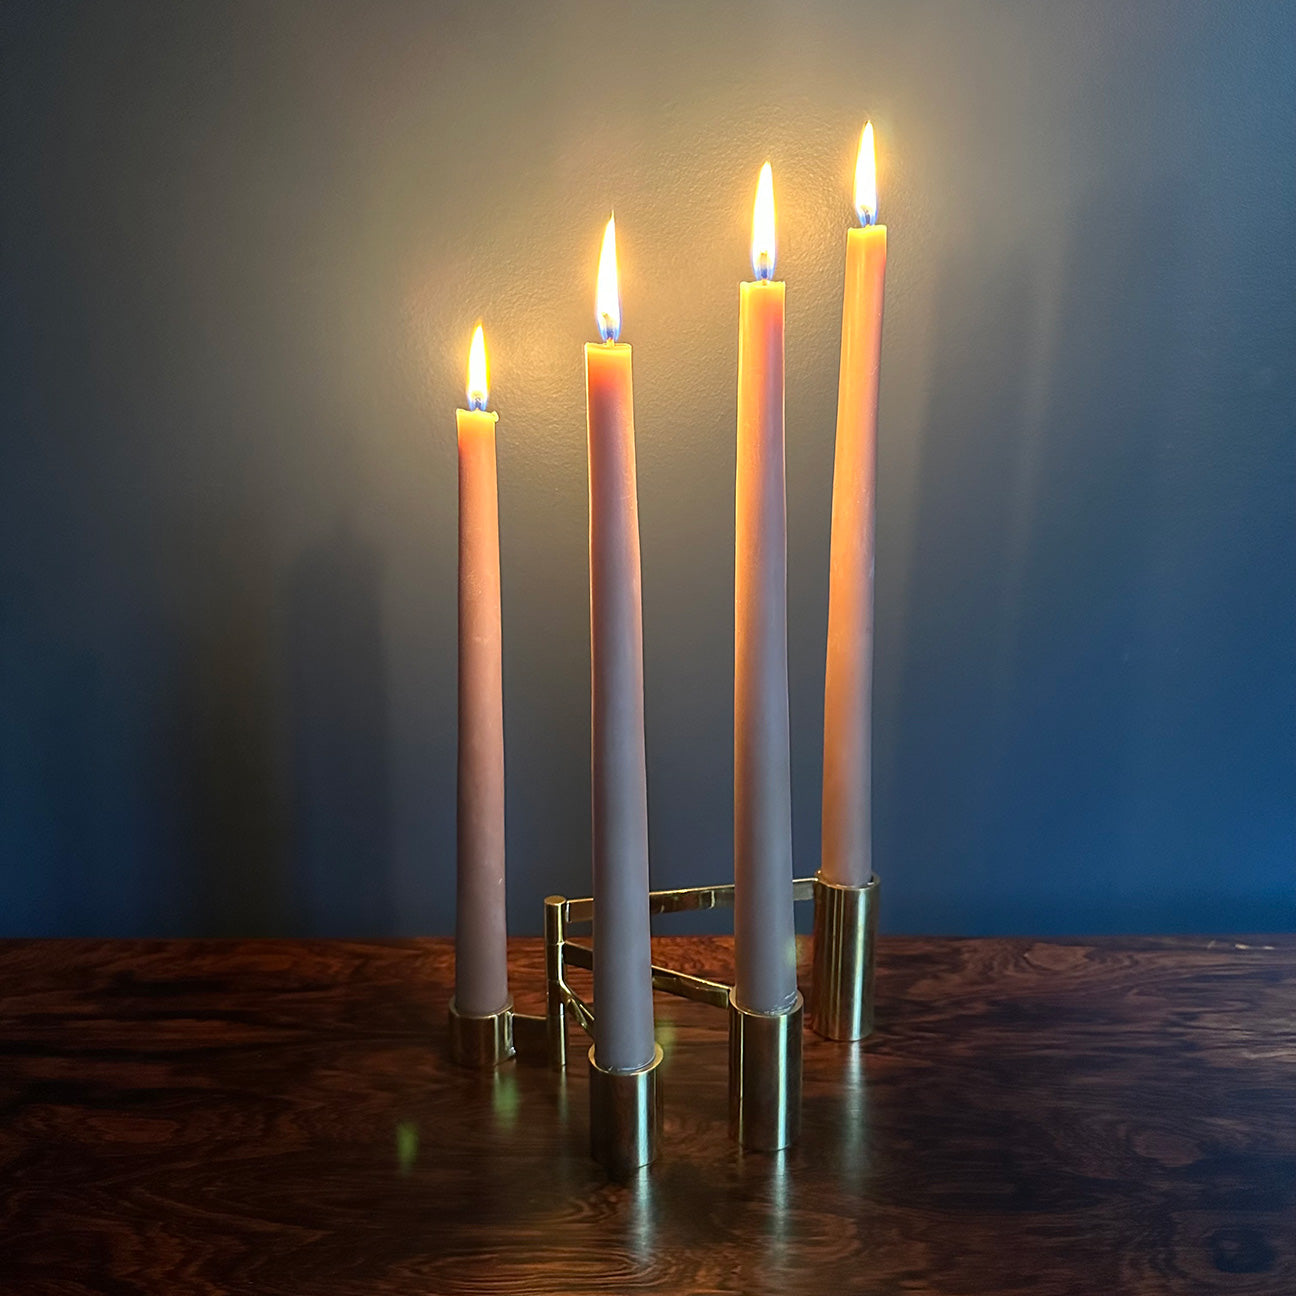 Image of M+A NYC Solid Brass Modular Swing Arm Candelabra with lit candles in the color "greige" sitting on a rosewood table against a blue green backdrop.